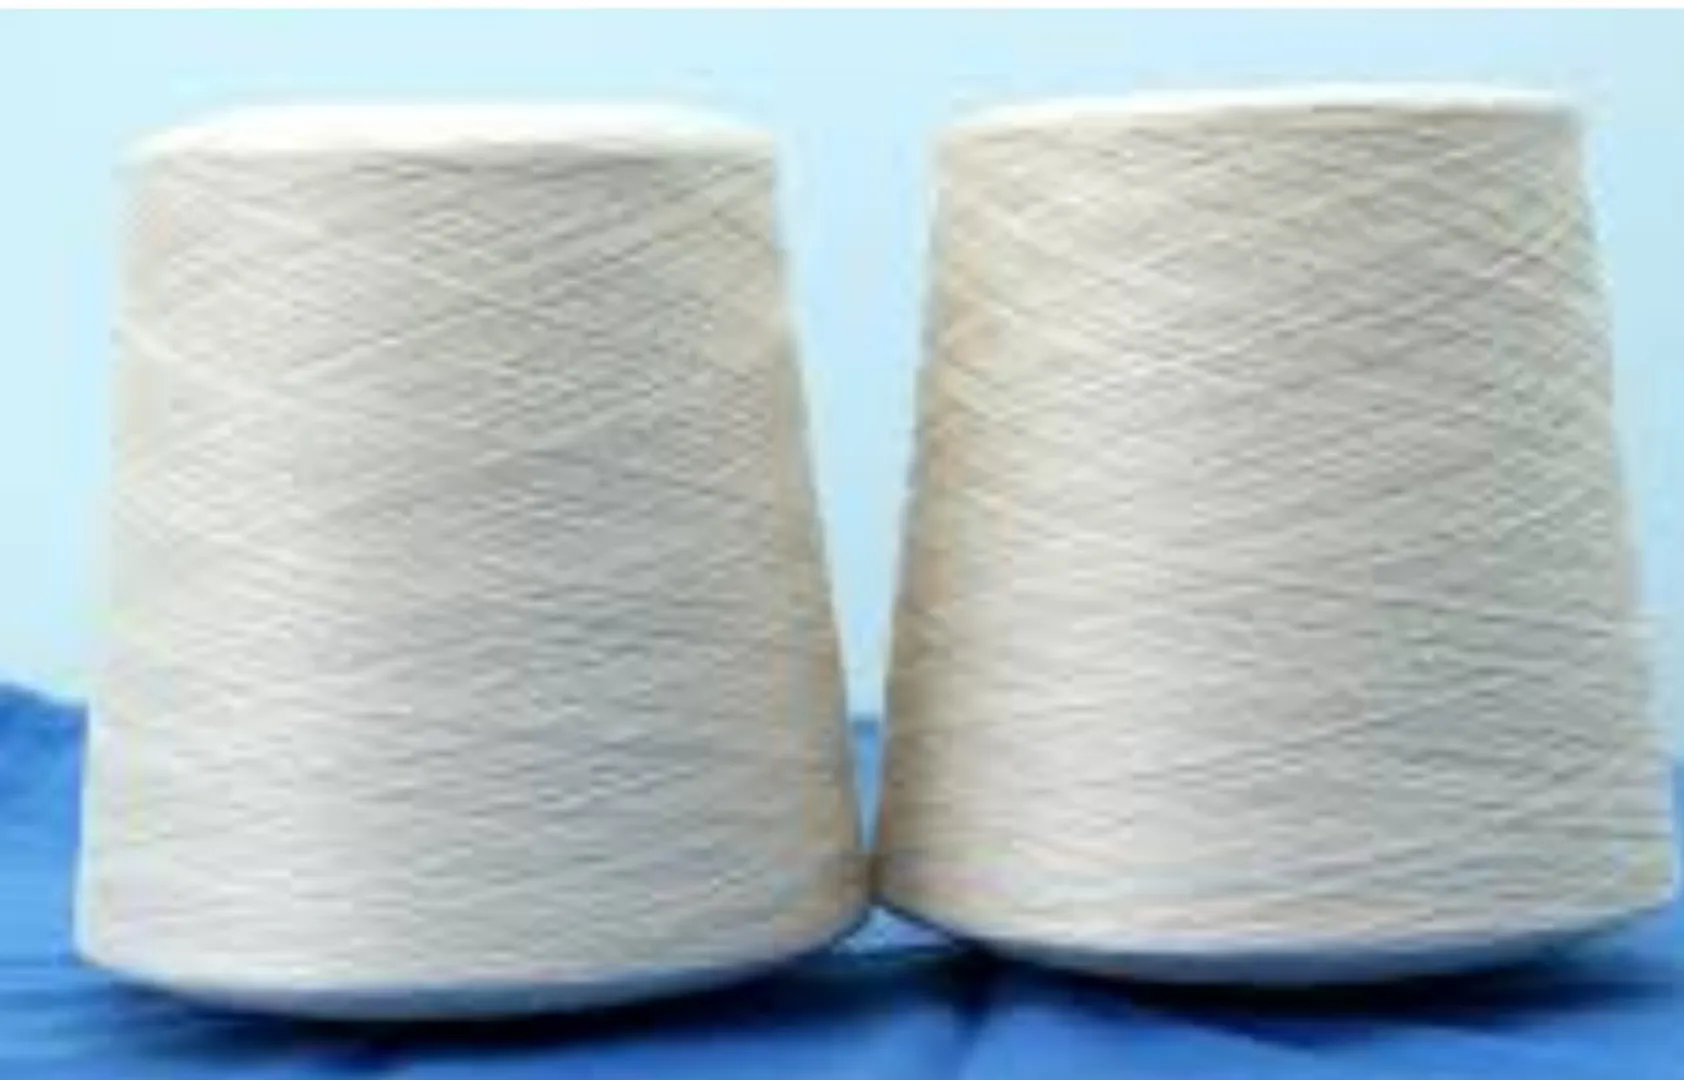 Looking for sewing thread factories

100% Spun polyester Sewing Thread
Raw White 20 MT, Optical White 5 MT
Count 50/2
packaging: polybag
Net weight per cone: 1.25/1.61/1.89 KG
Shipping: CIF, Chattogram
Payment: LC at sight
